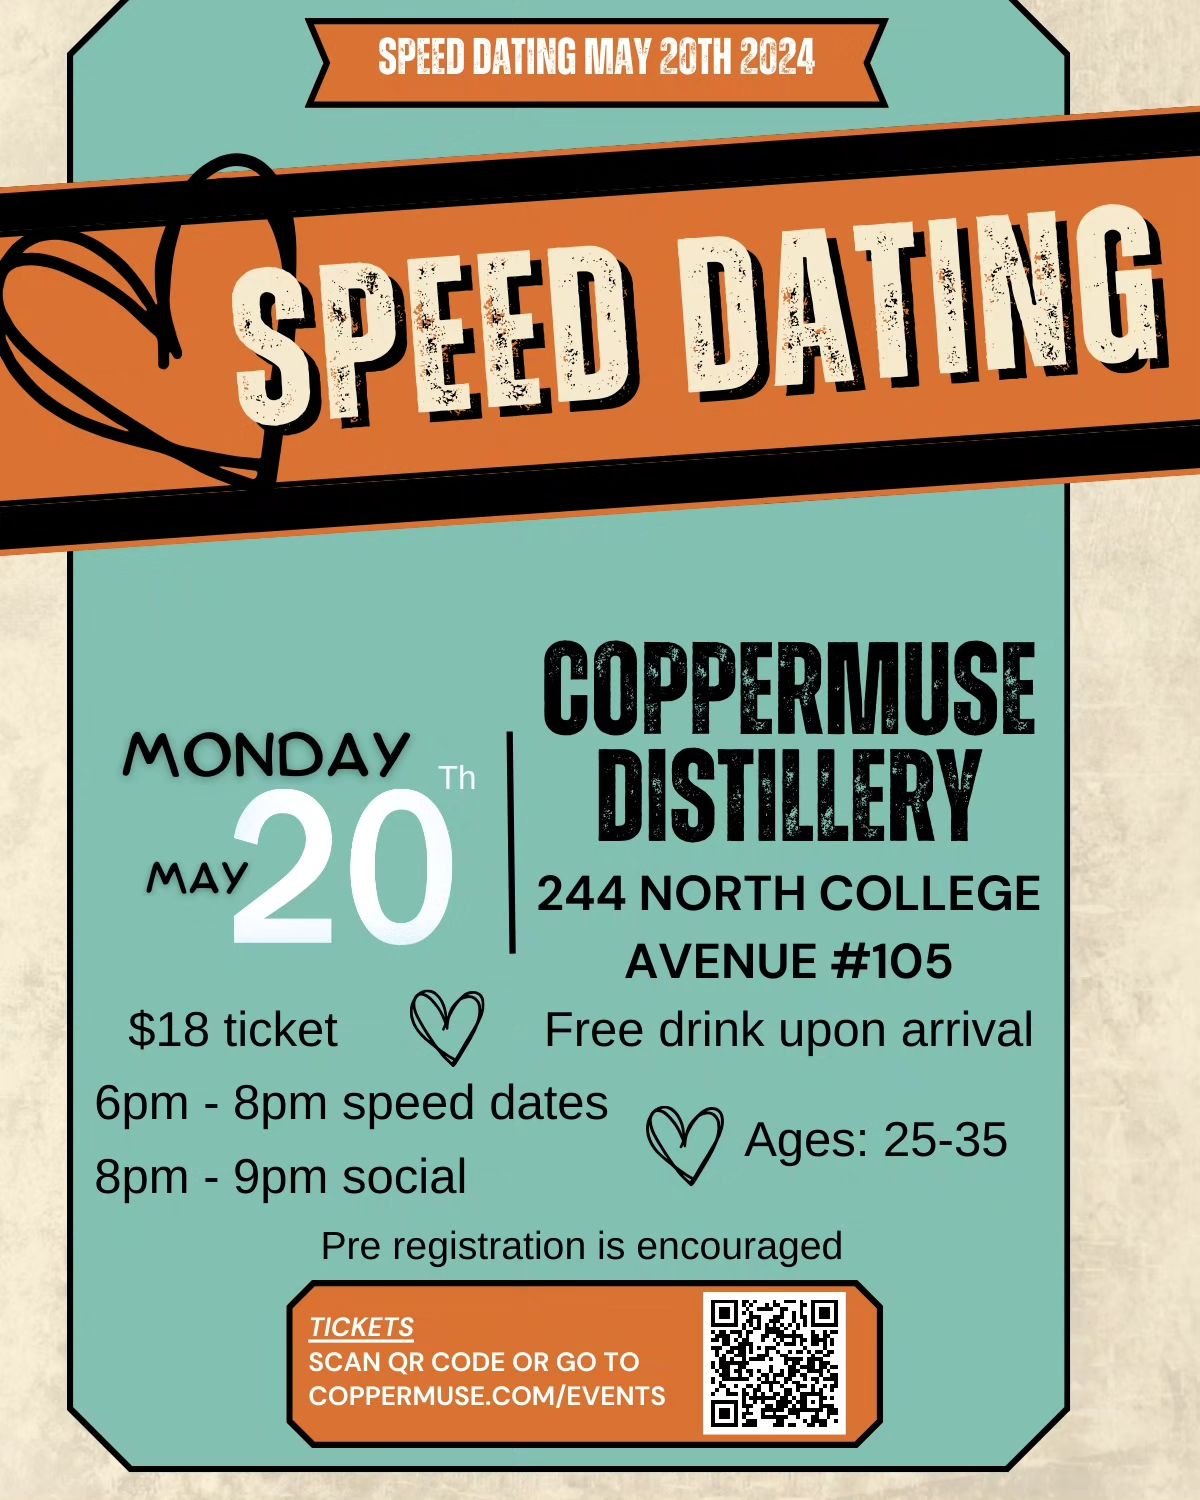 Have you been looking for love in all the wrong places? Are you single and ready to mingle? 💘

Well, join us on Monday, May 20th, for our speed dating event!

Pre registration is preferred. Sign up is on our website!